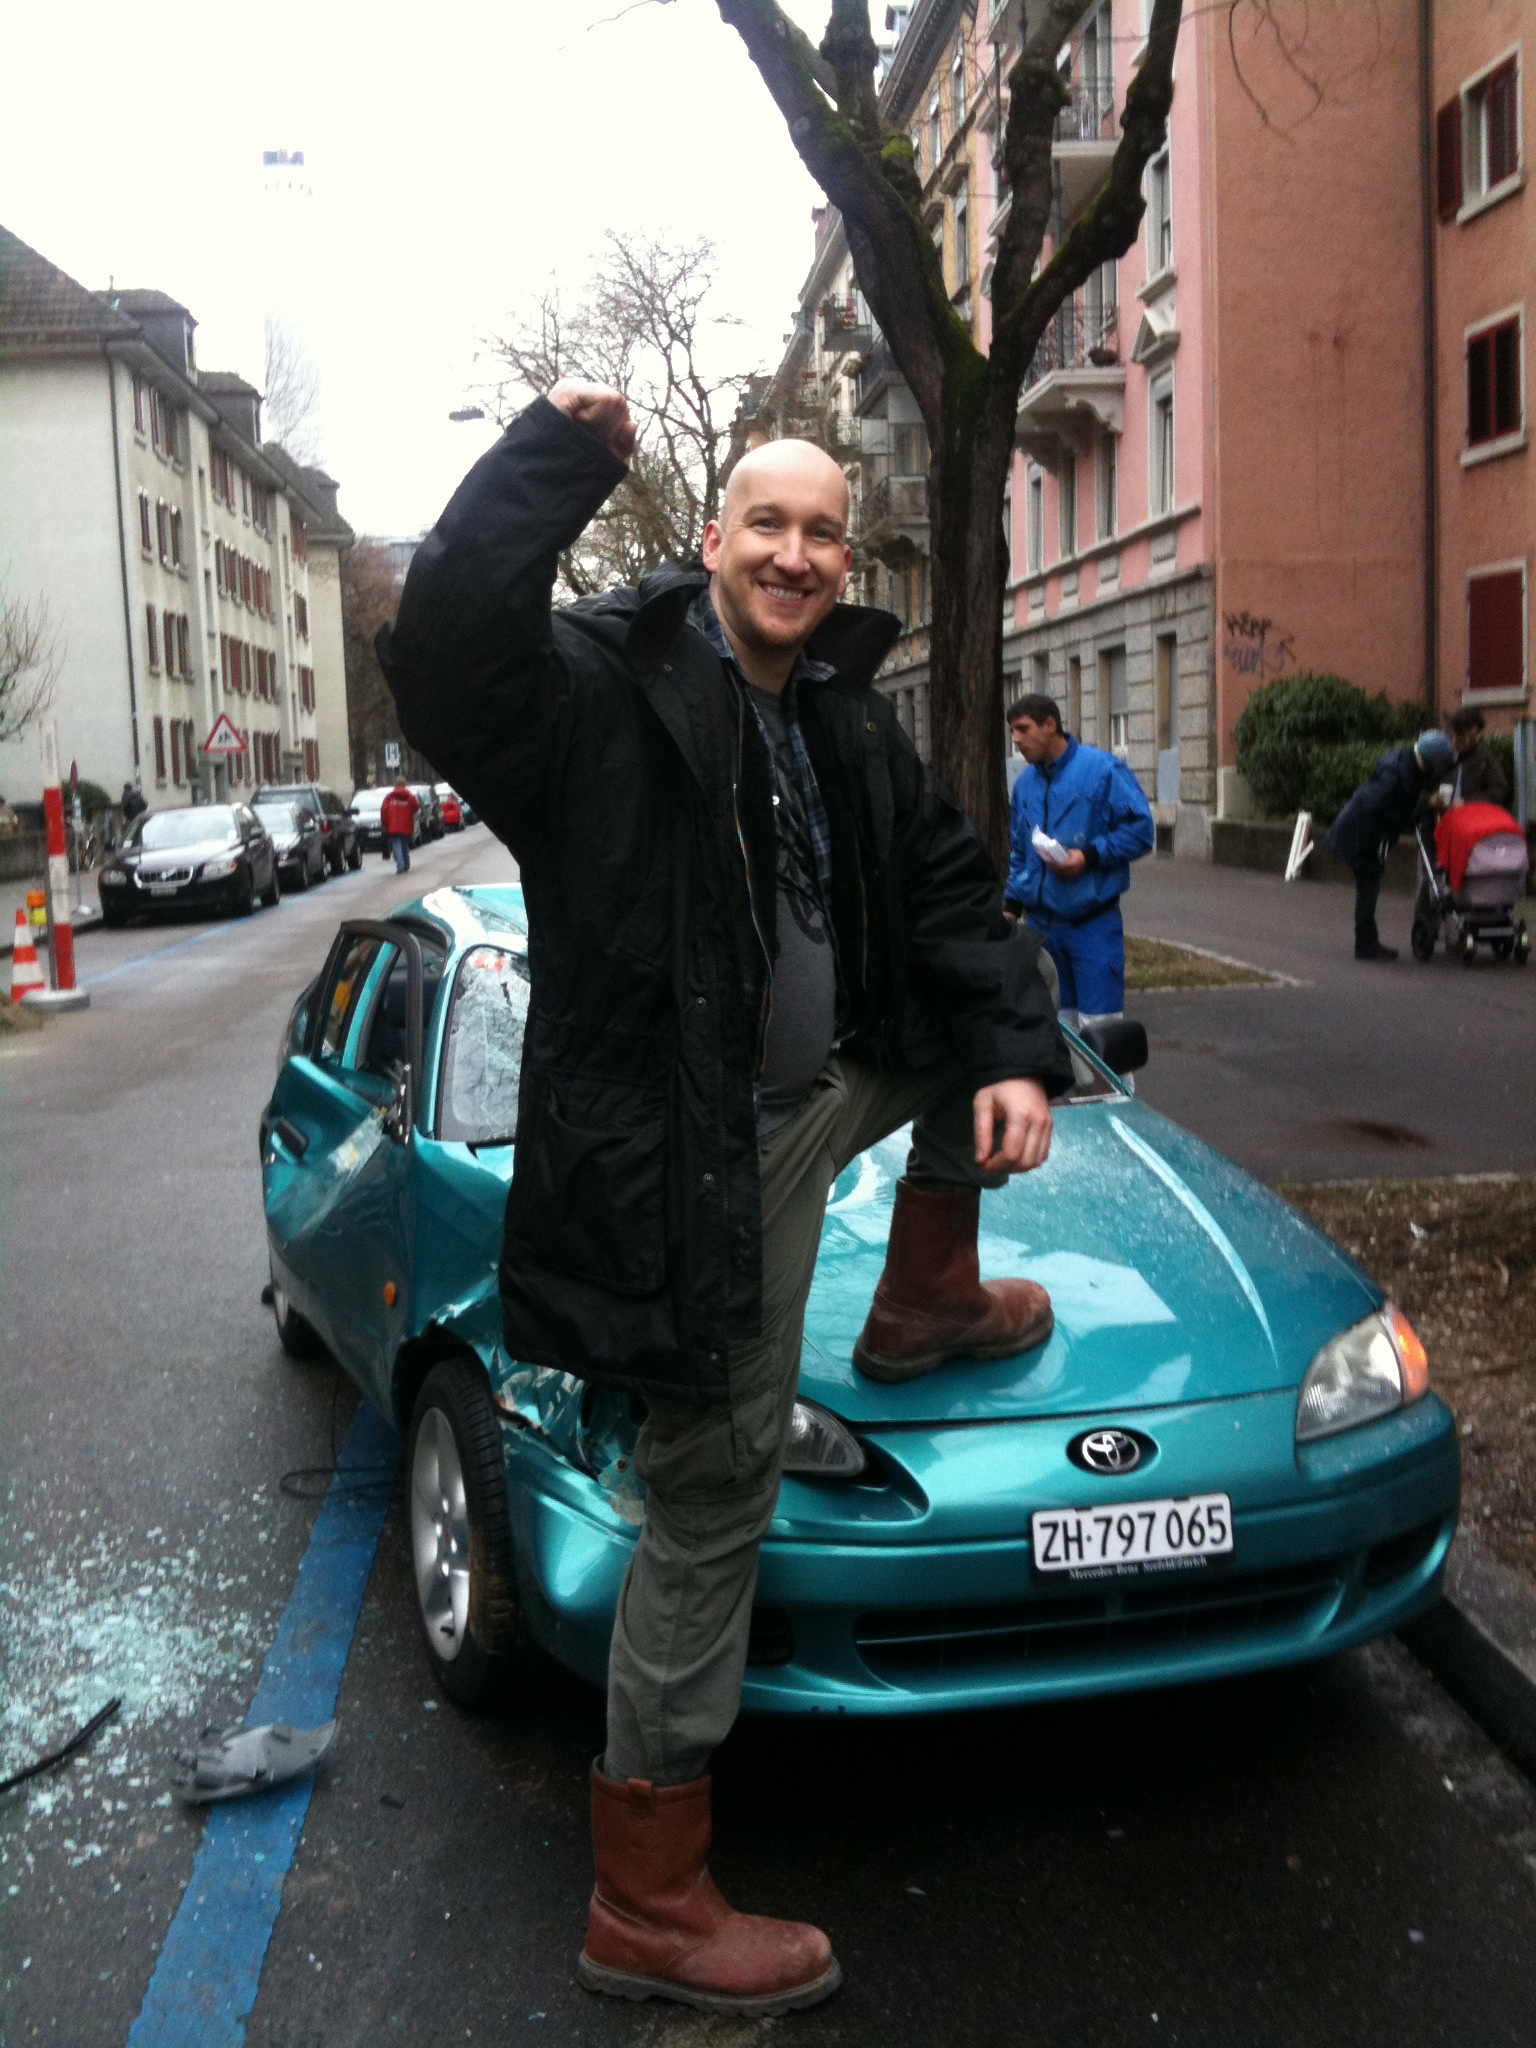 Filming in Suisse. Car trashed by DP